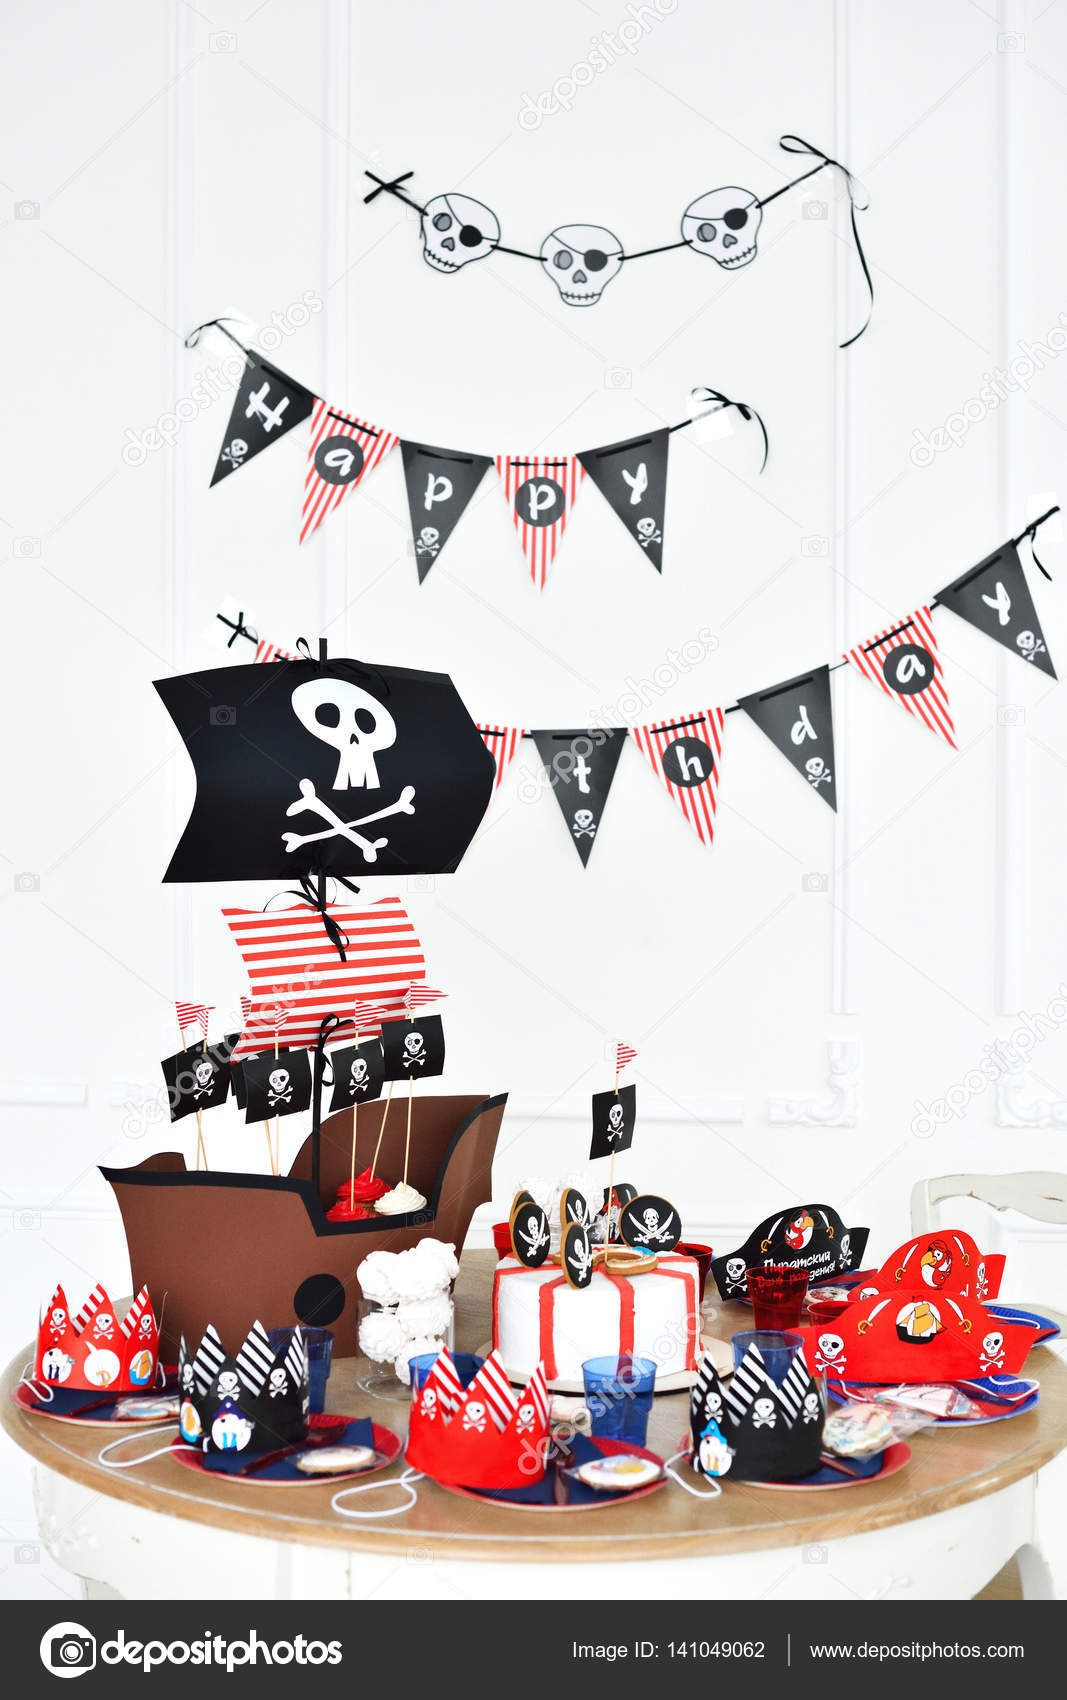 Pirate Party. Decorations for birthday — Stock Photo © nosenkoos